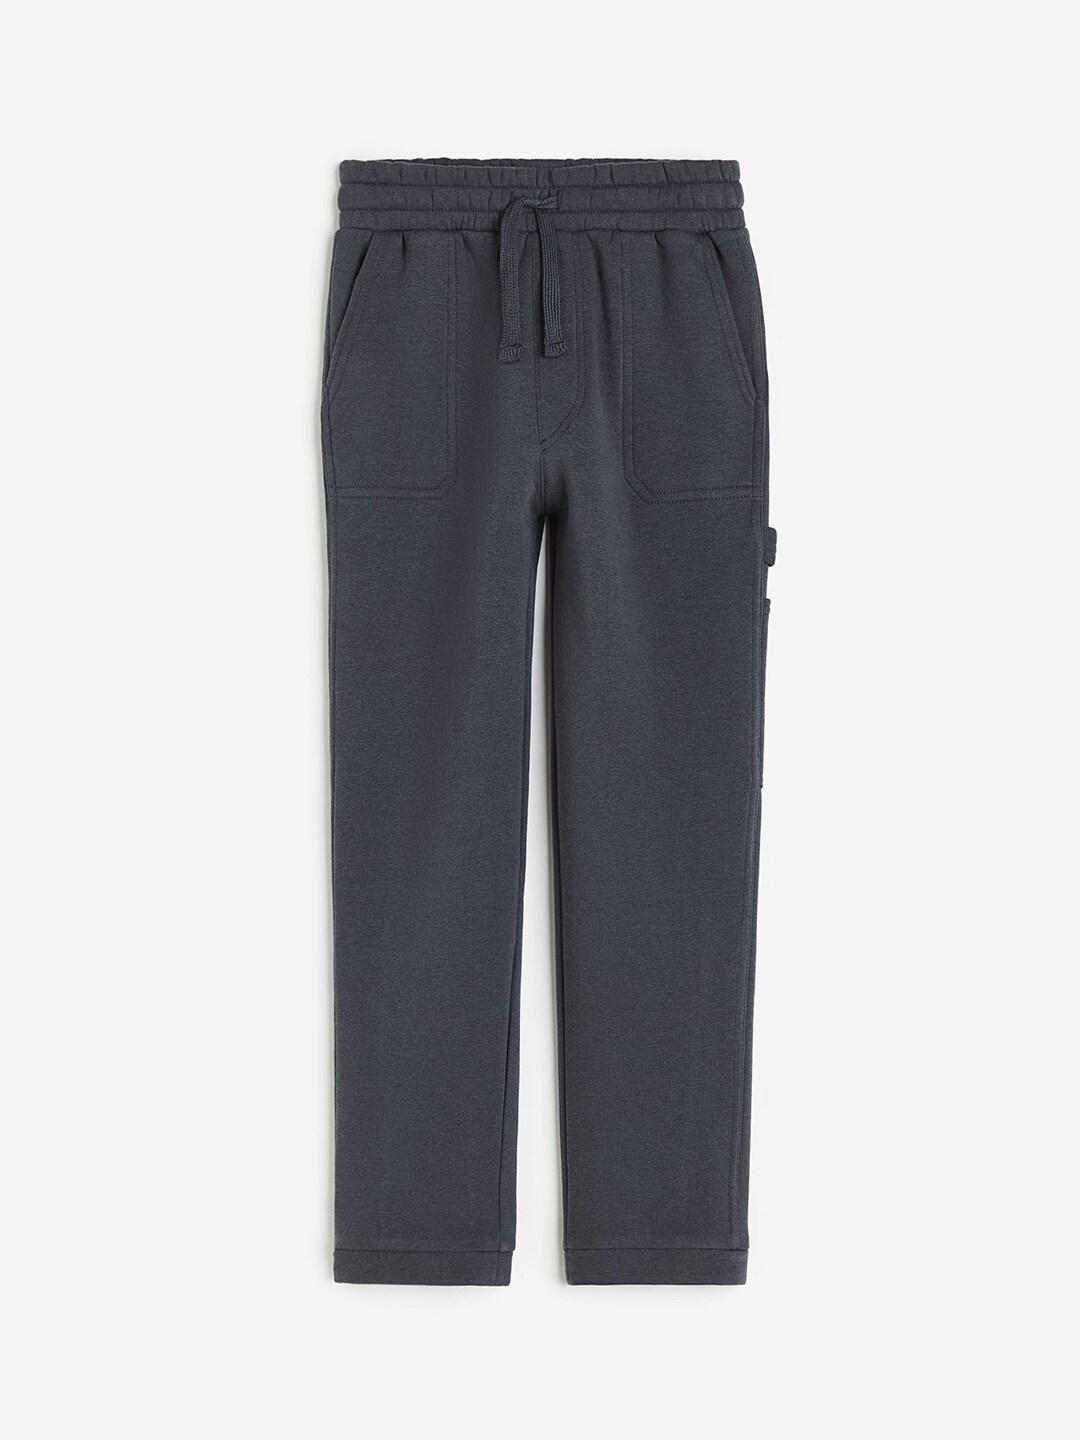 h&m boys cargo trousers